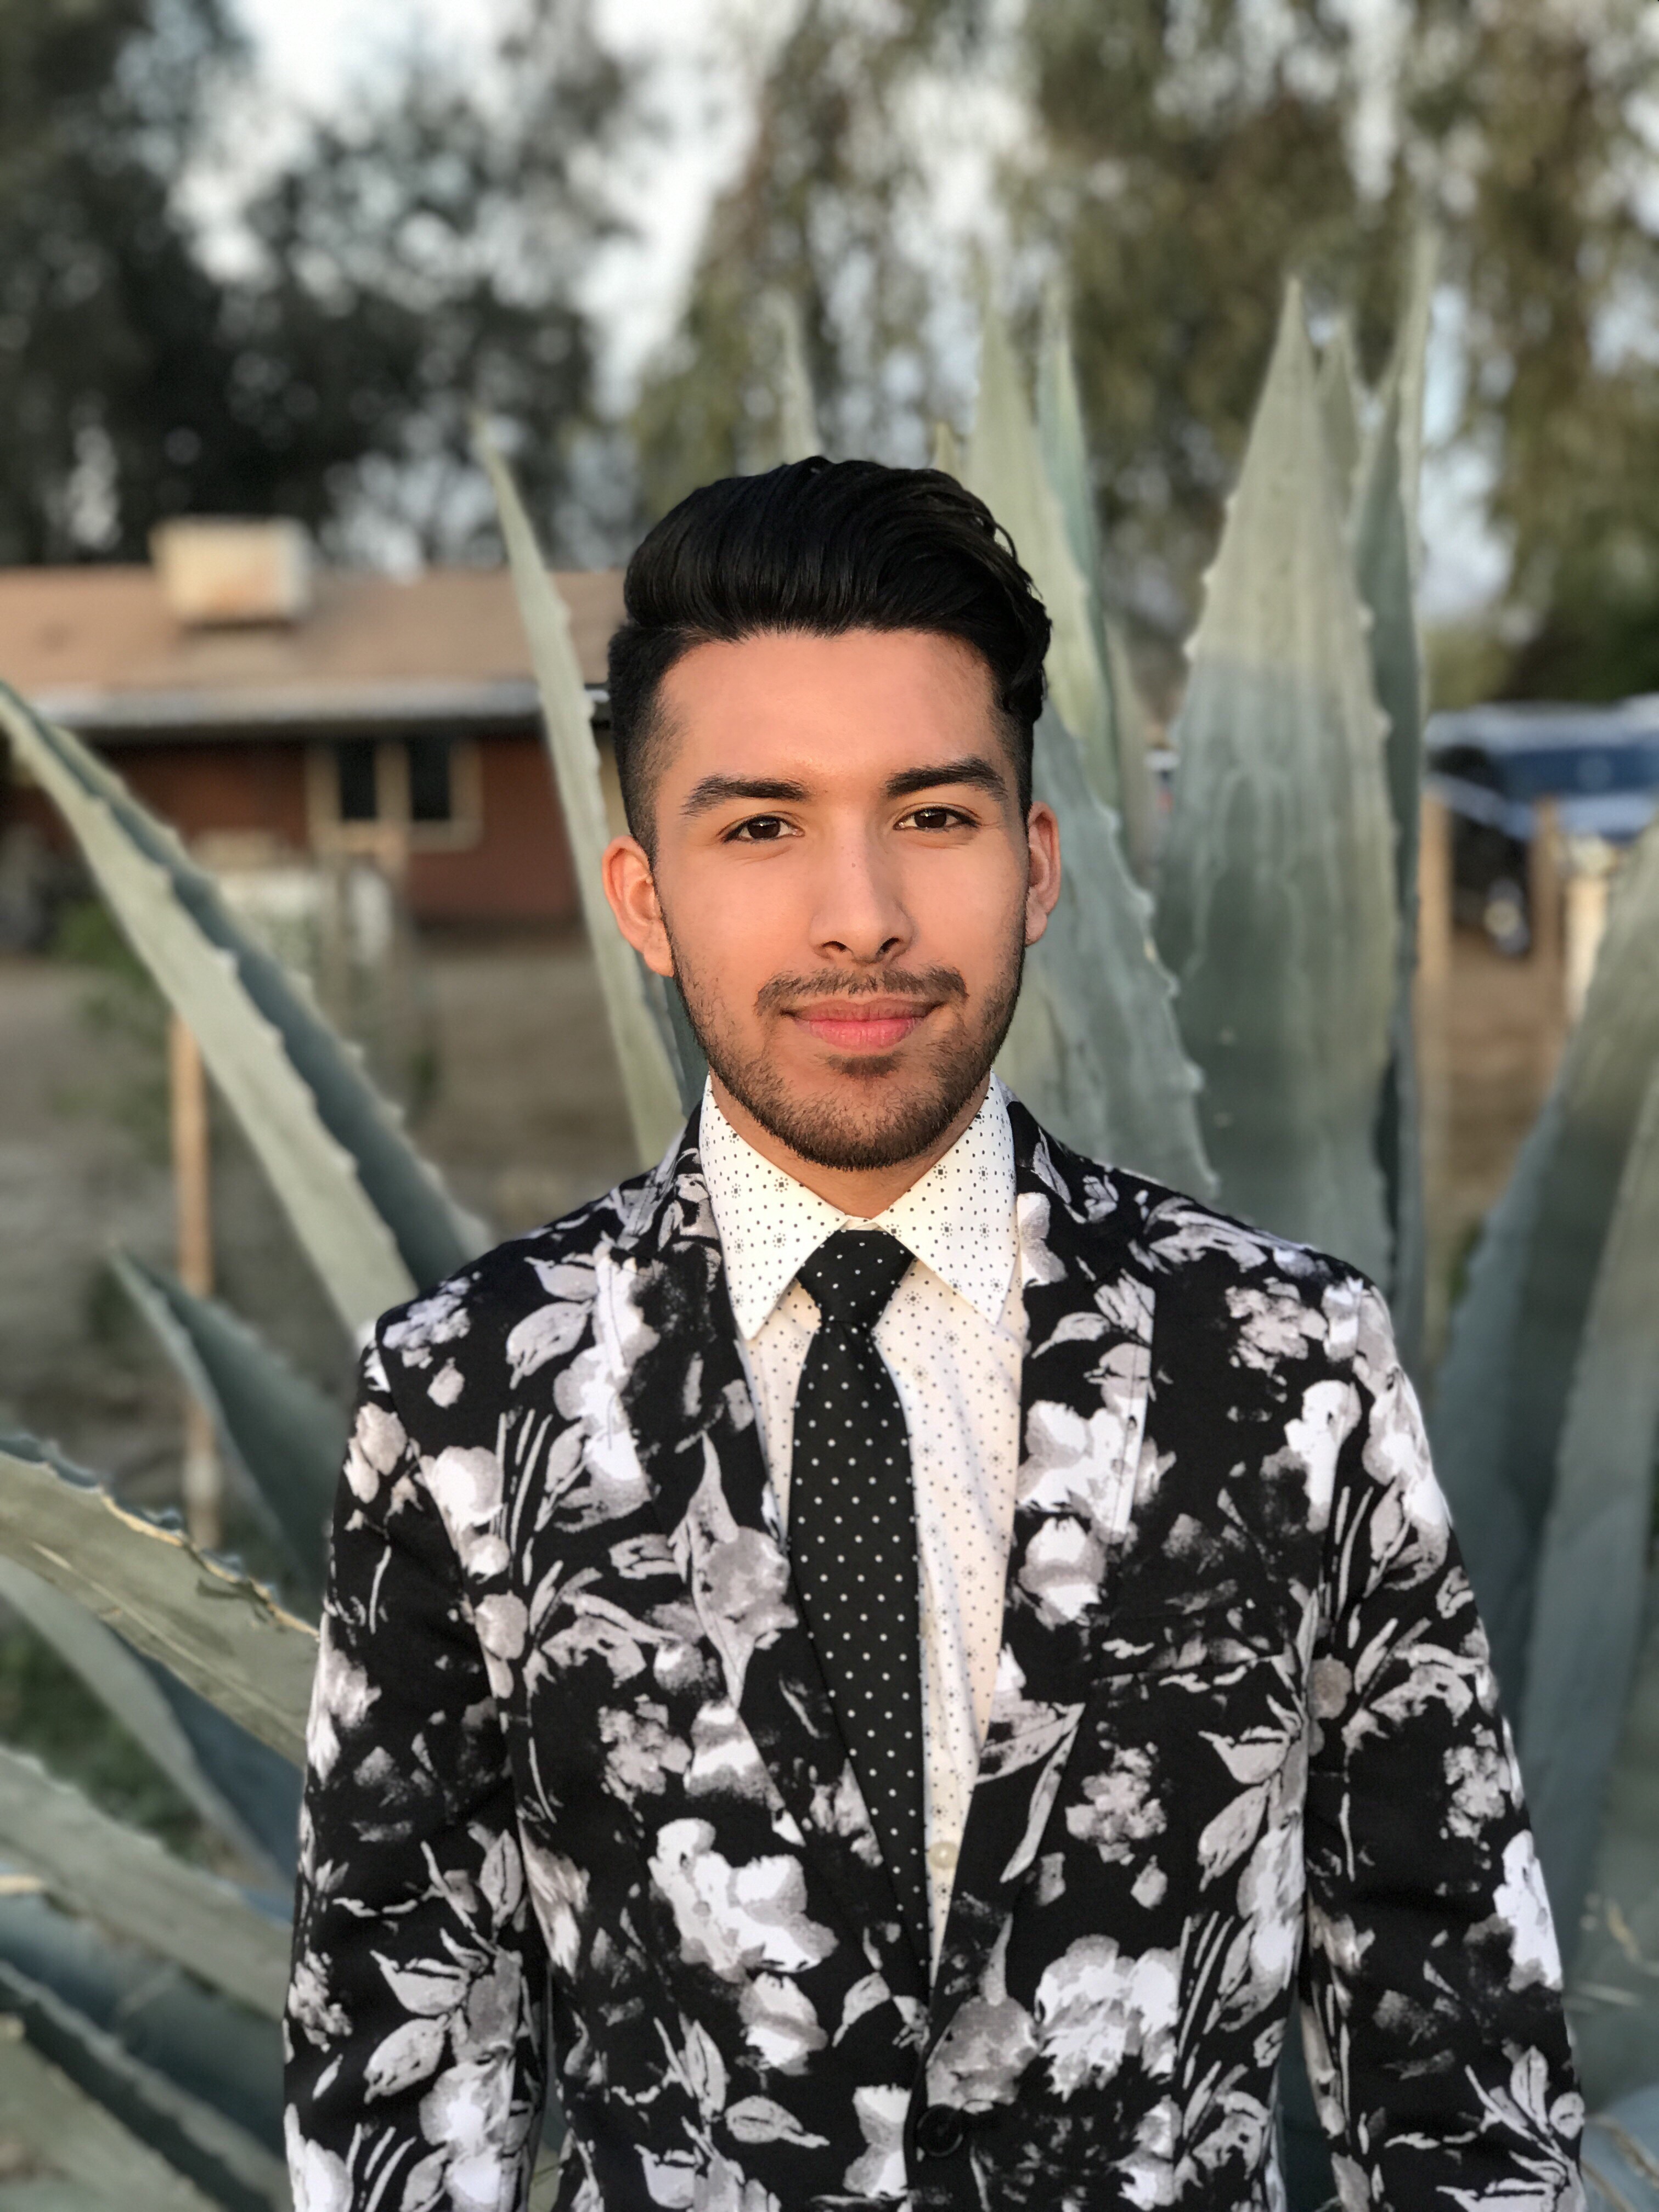 Alfie Aguilar Vidrio, standing in front of a cactus, wears a black and white floral-print suit jacket and smiles at the camera